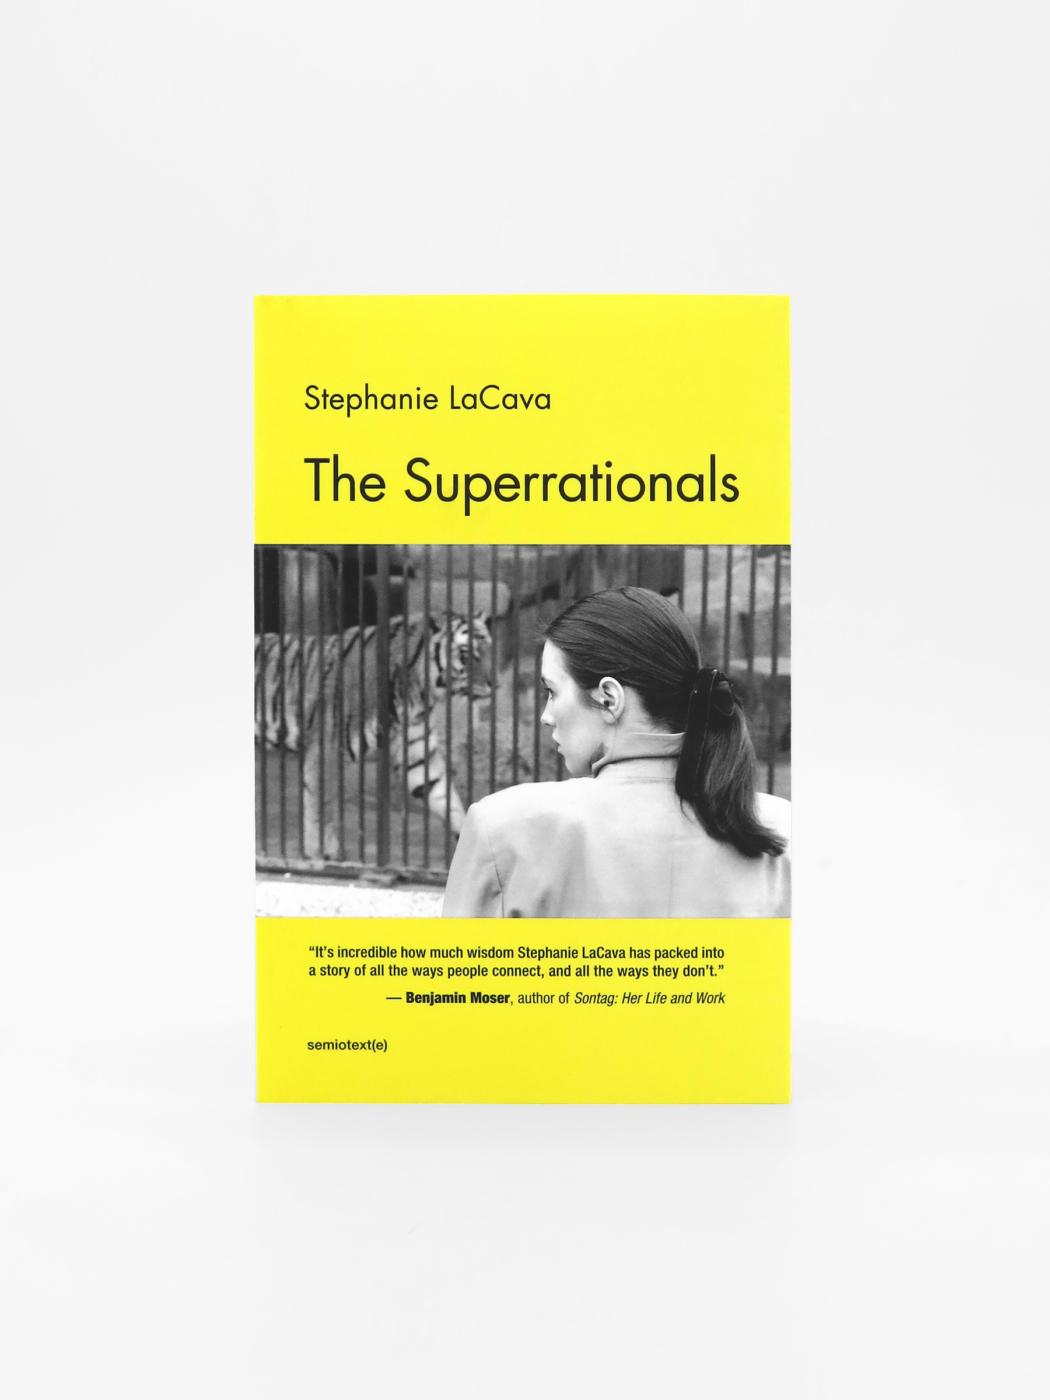 Stephanie LaCava, The Superrationals